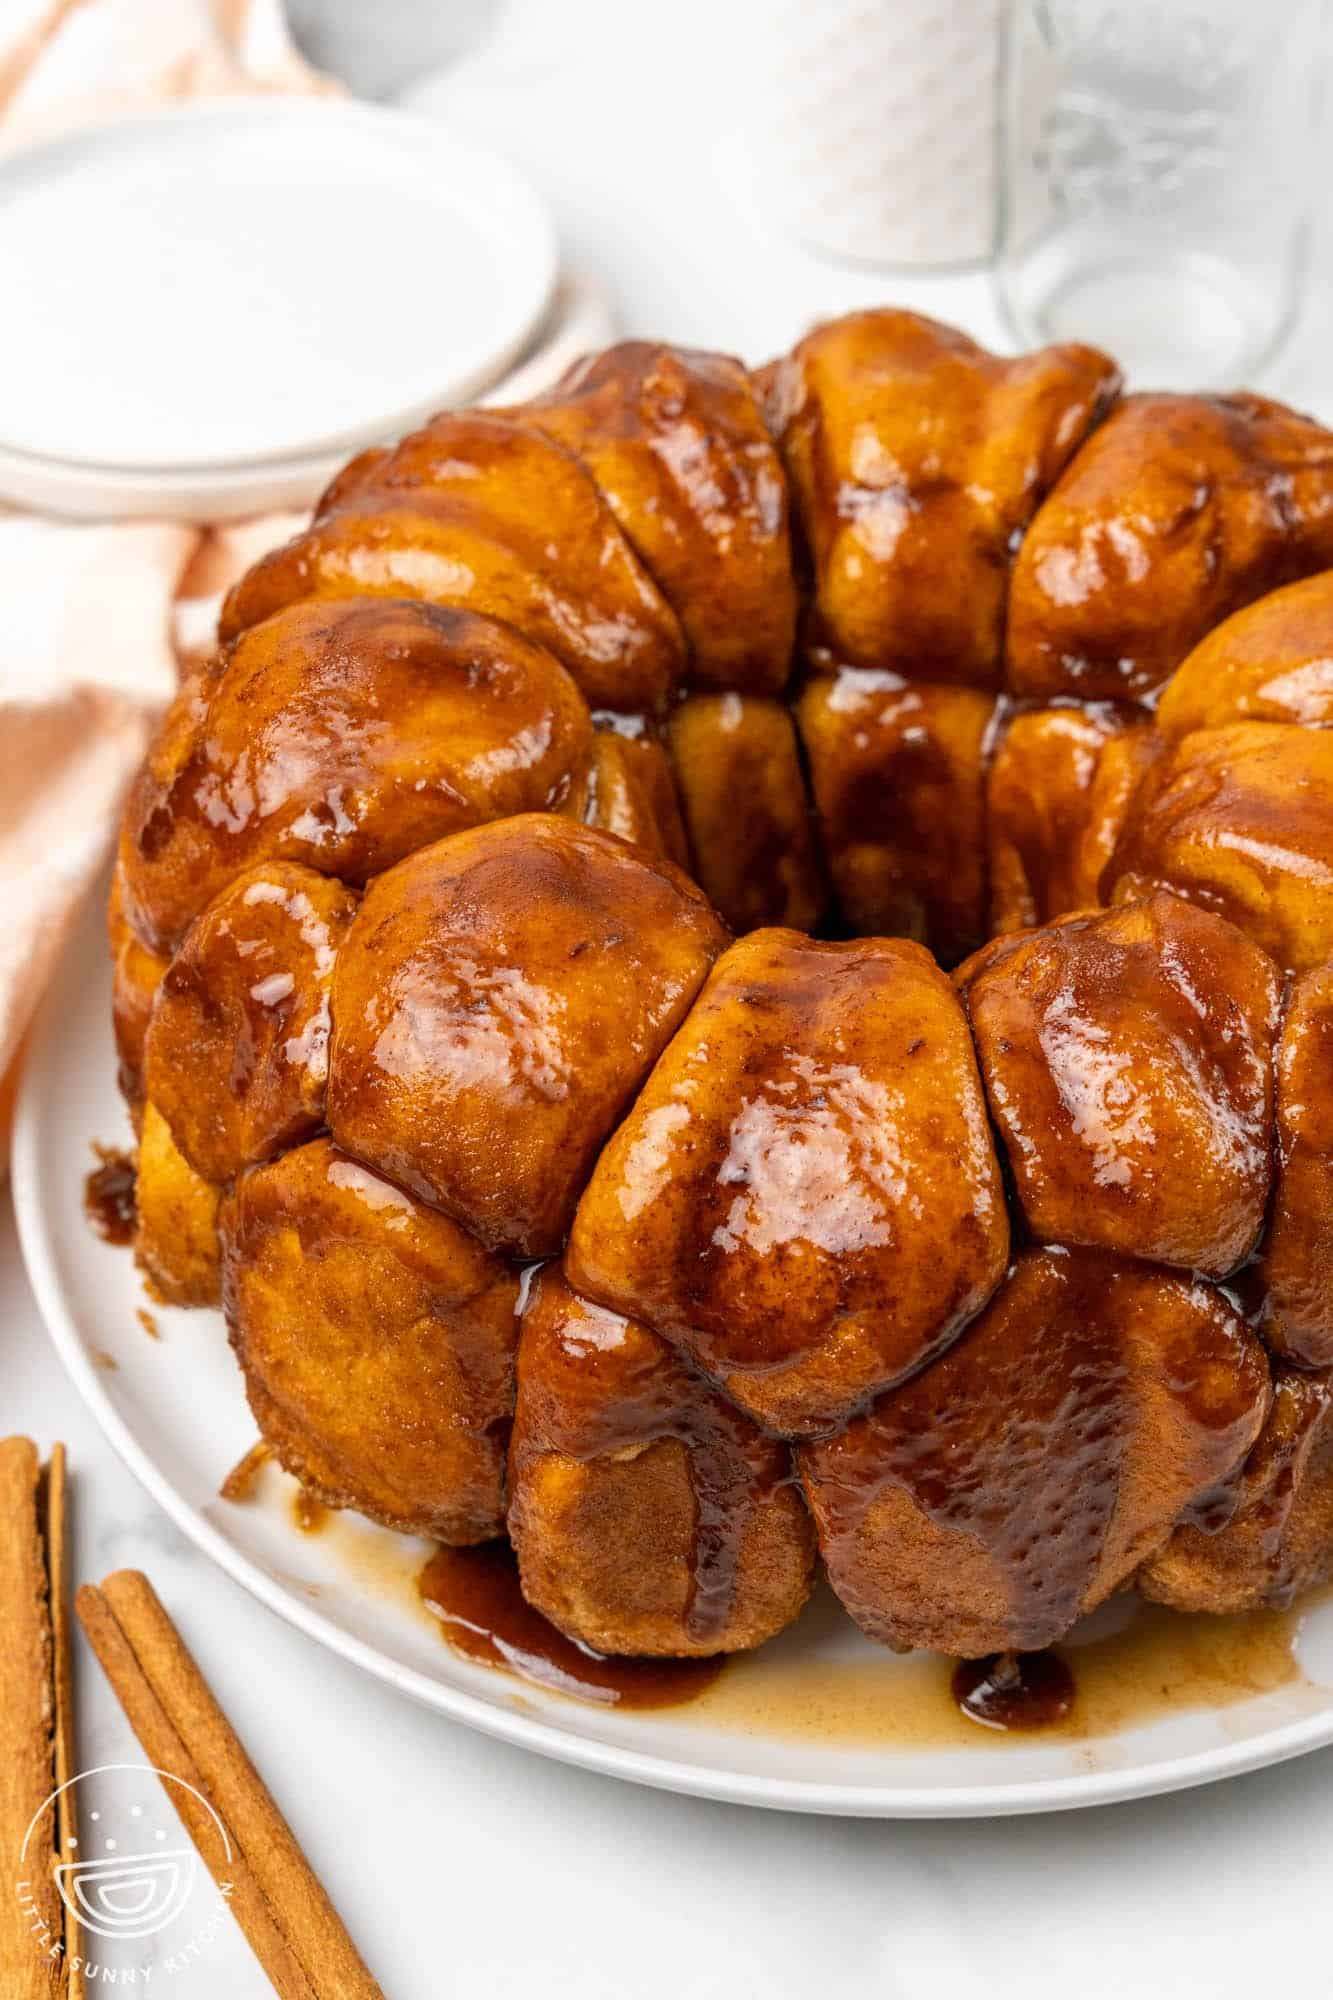 Monkey bread served on a white plate, made in a bundt pan.